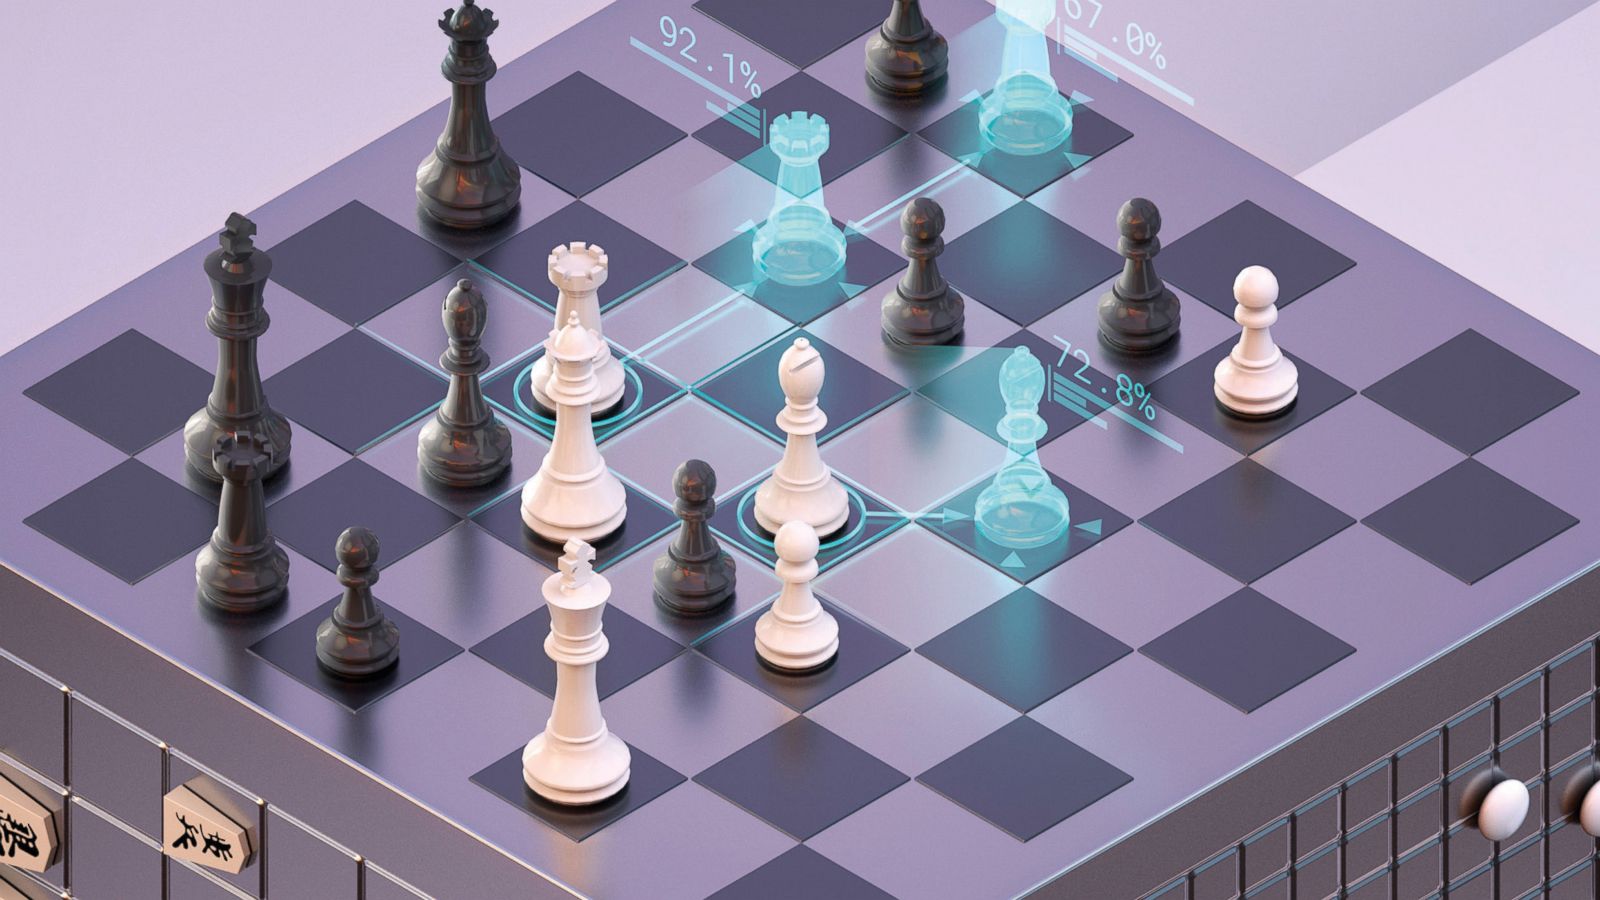 A new computer program taught itself how to play chess, go and